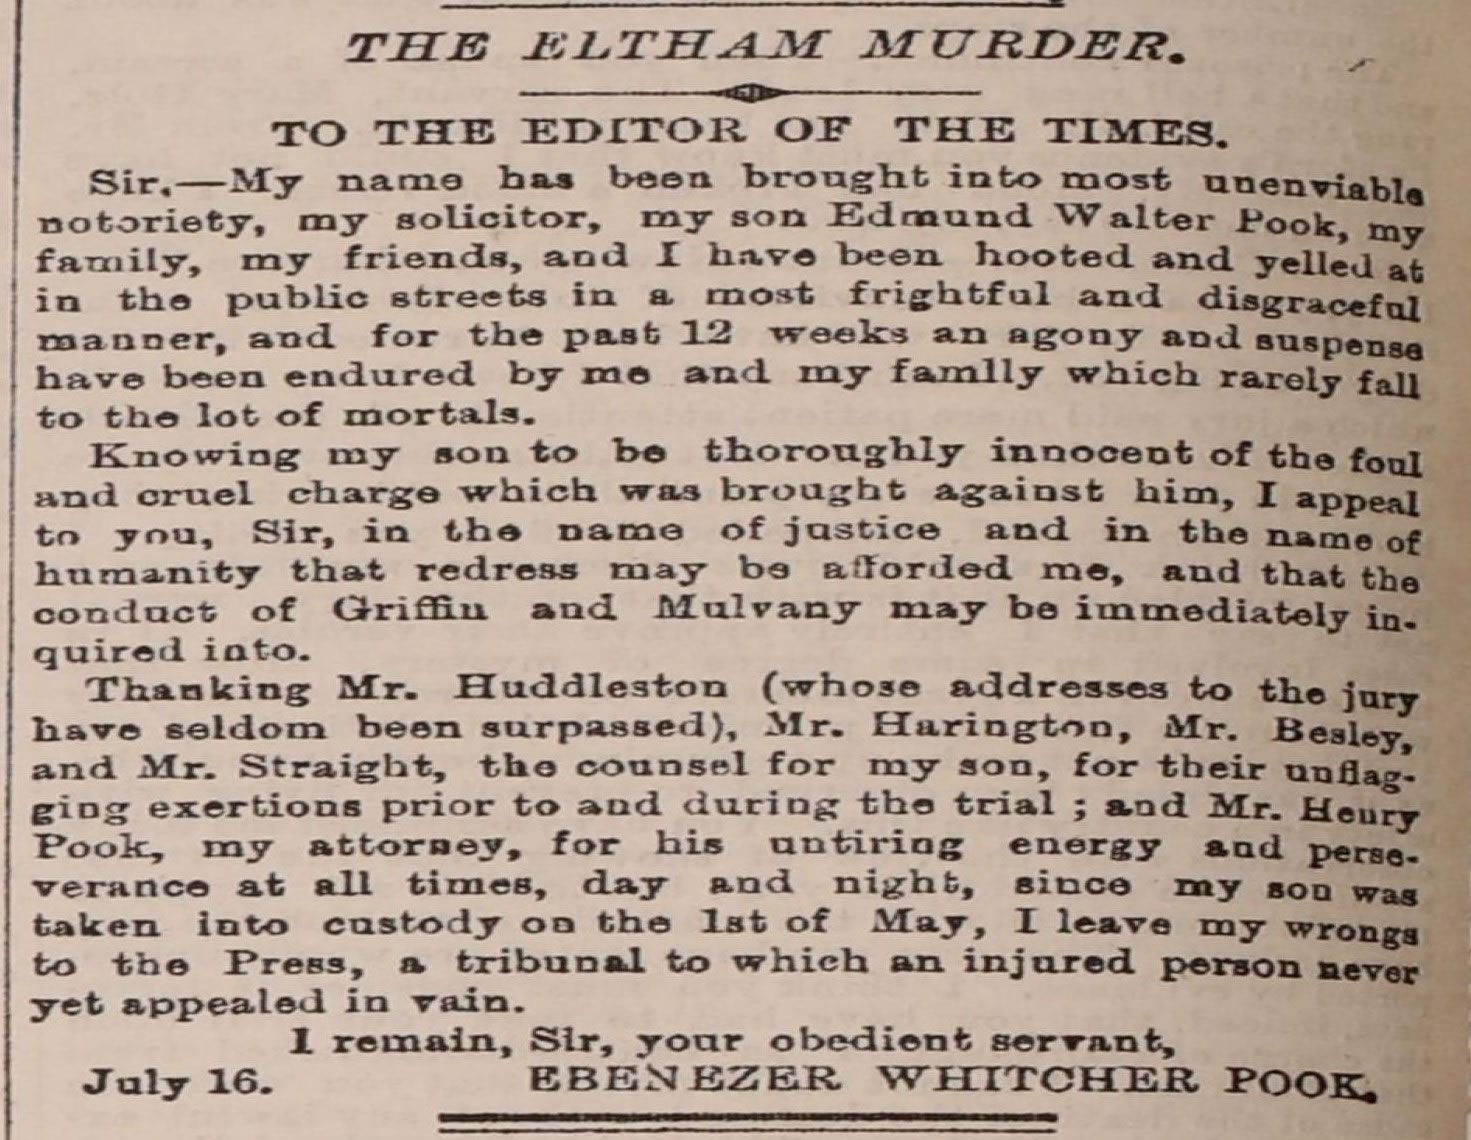 Letter to the Editor of the Times 17 July 1871